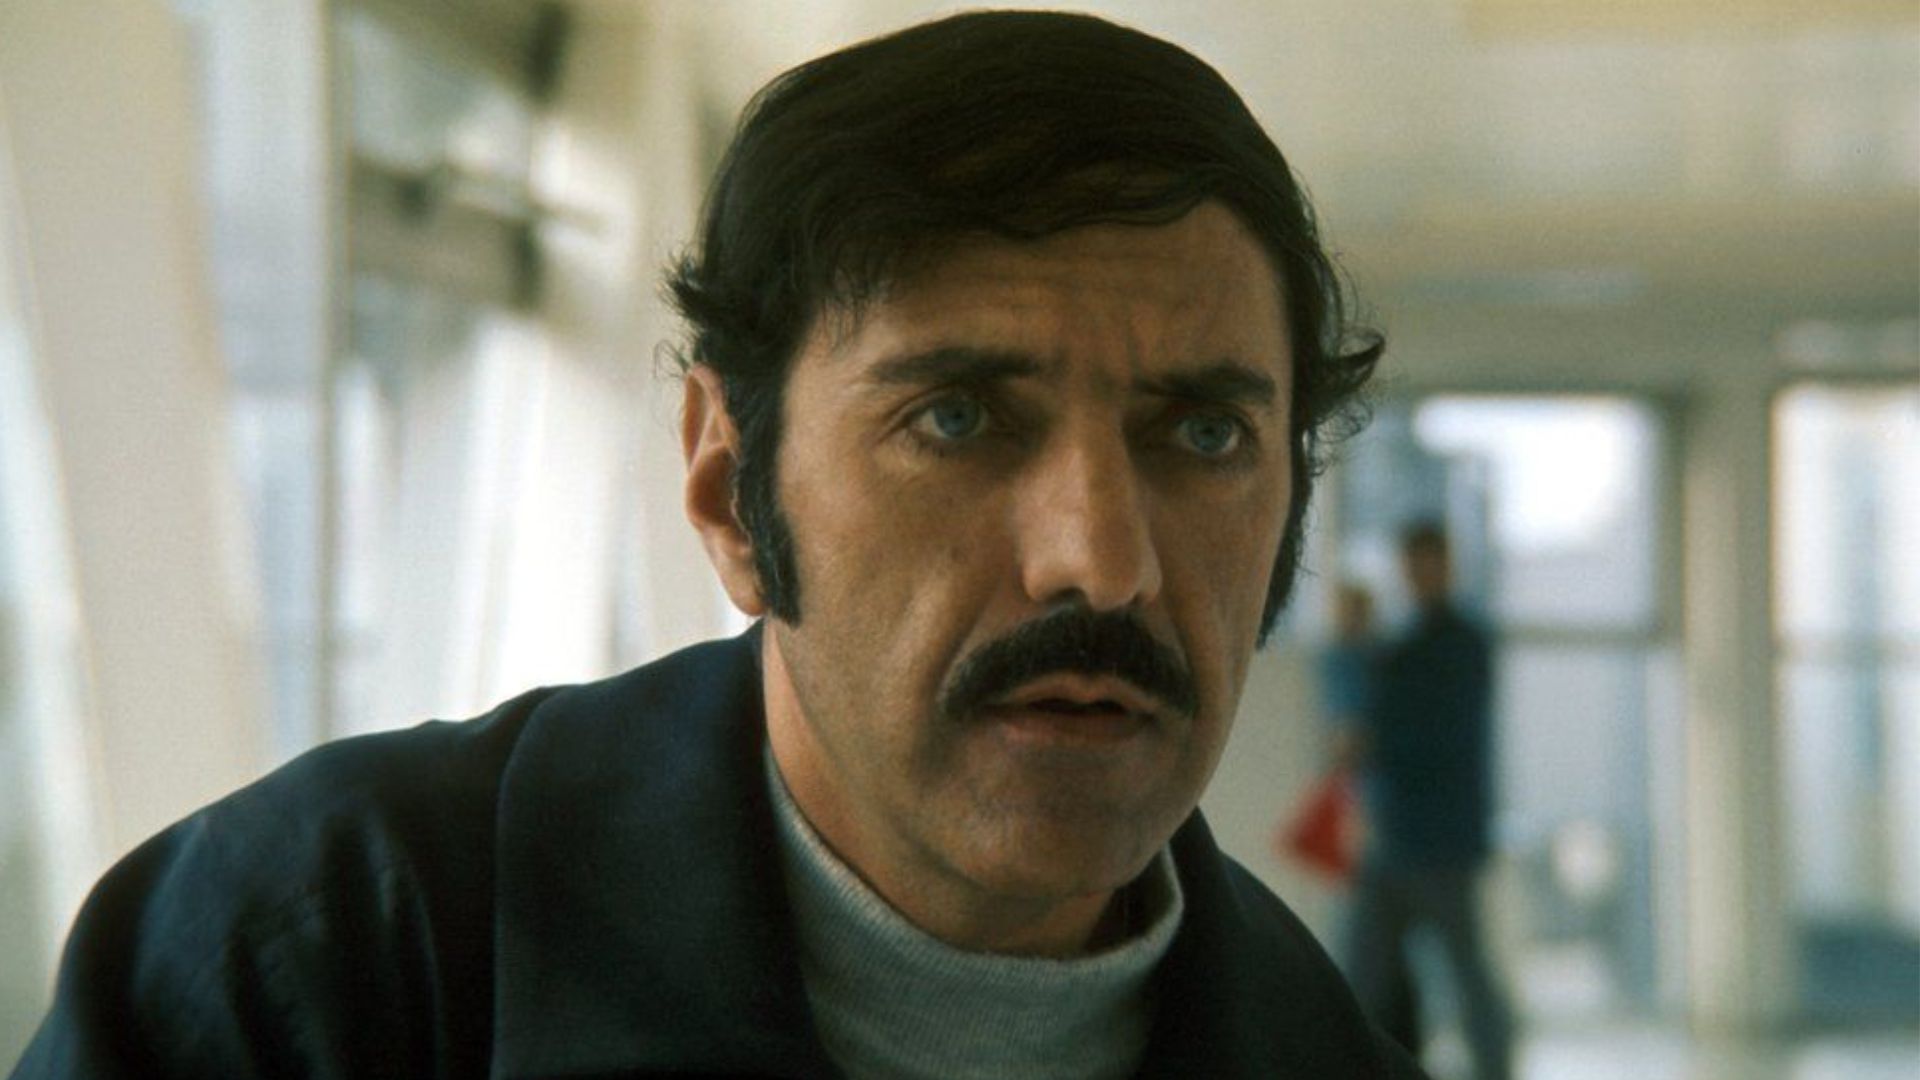 William Peter Blatty With A Mustache